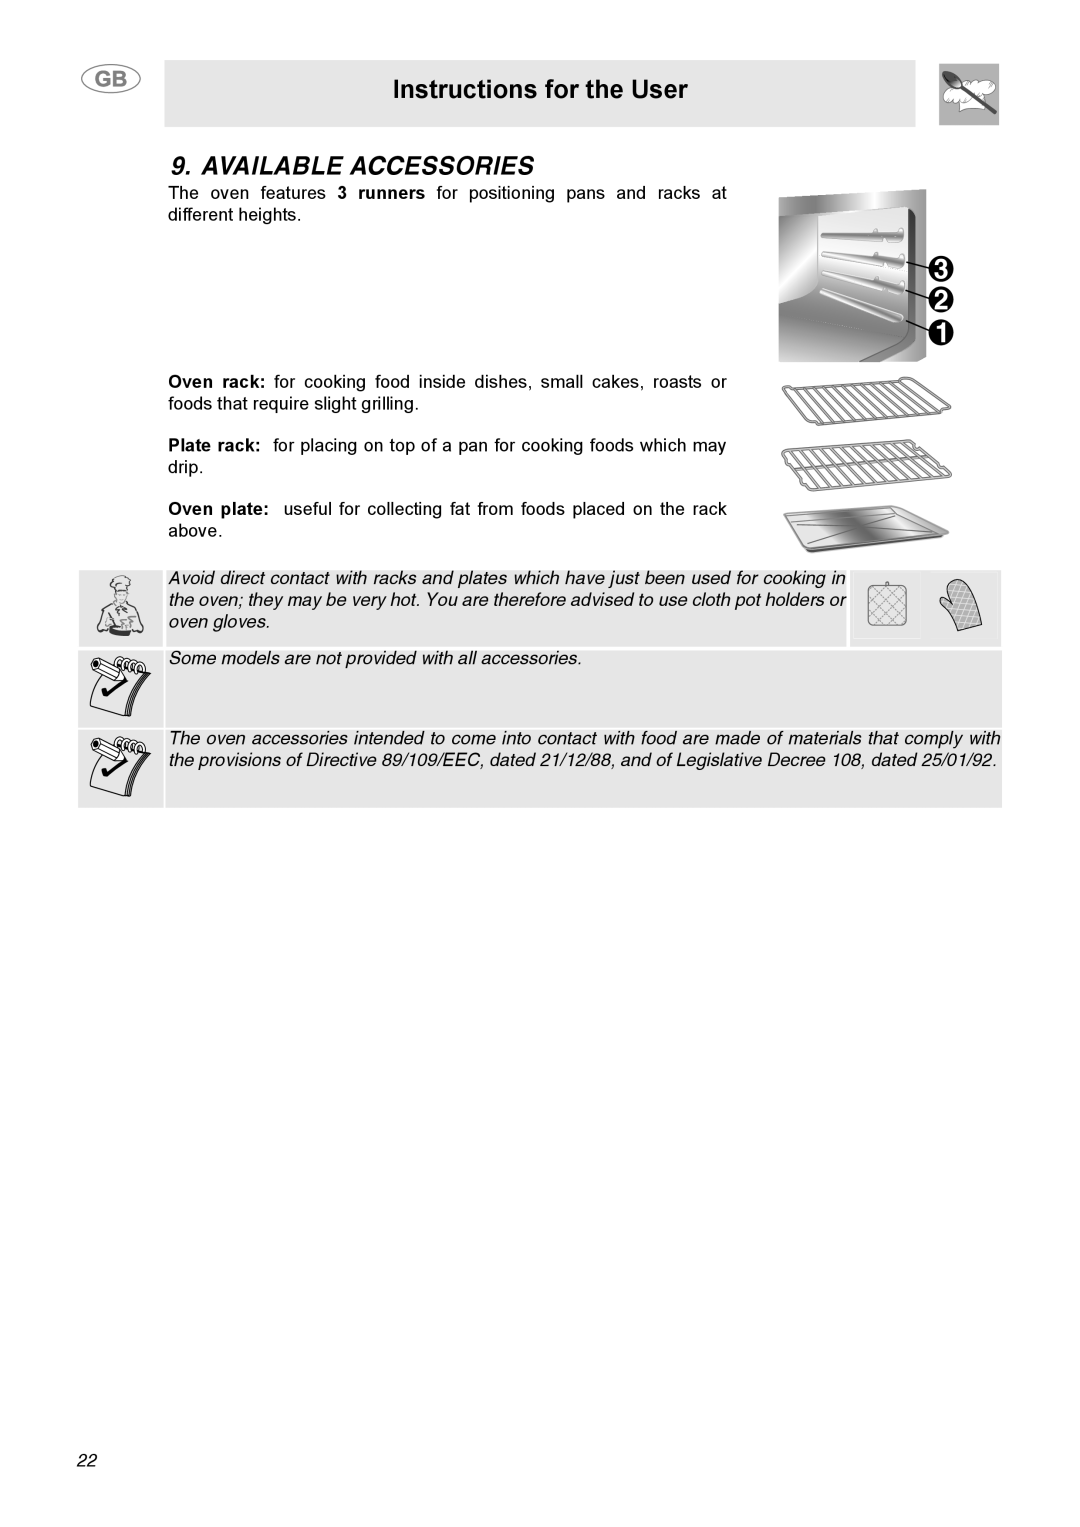 Smeg C9GGSSA manual Available Accessories, Instructions for the User 